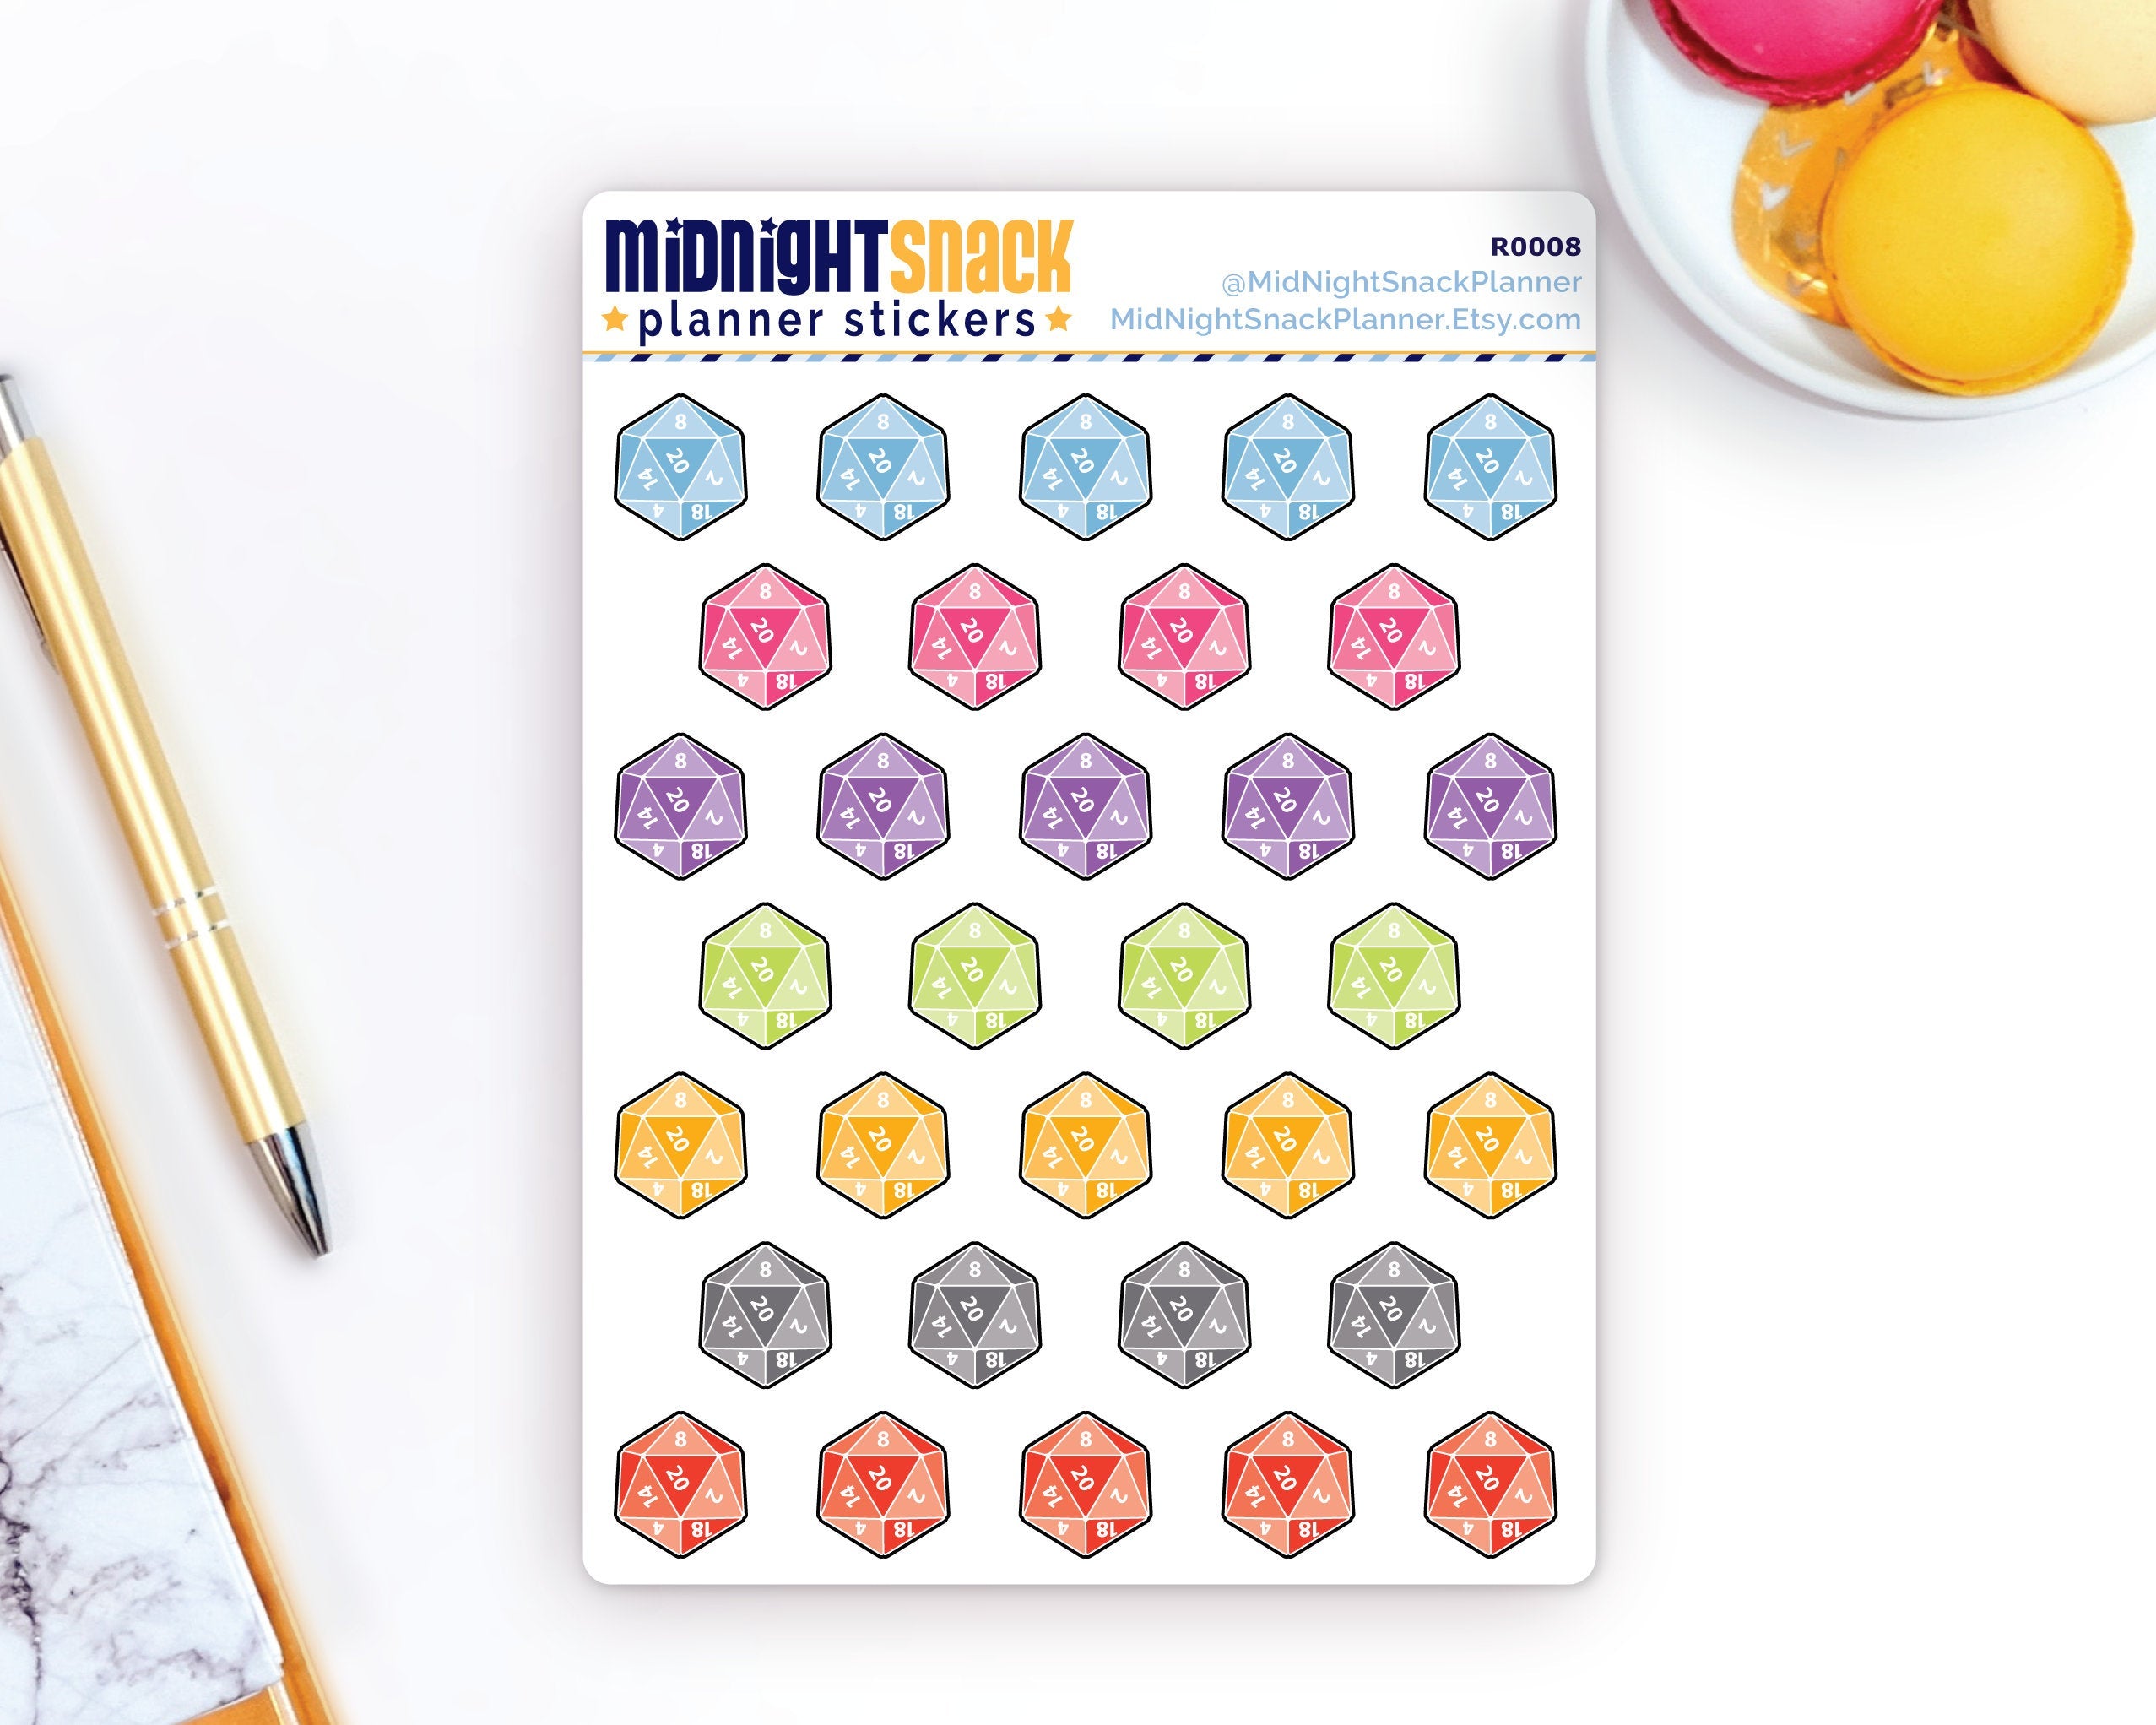 20 sided dice planner stickers shown on the full sticker sheet.